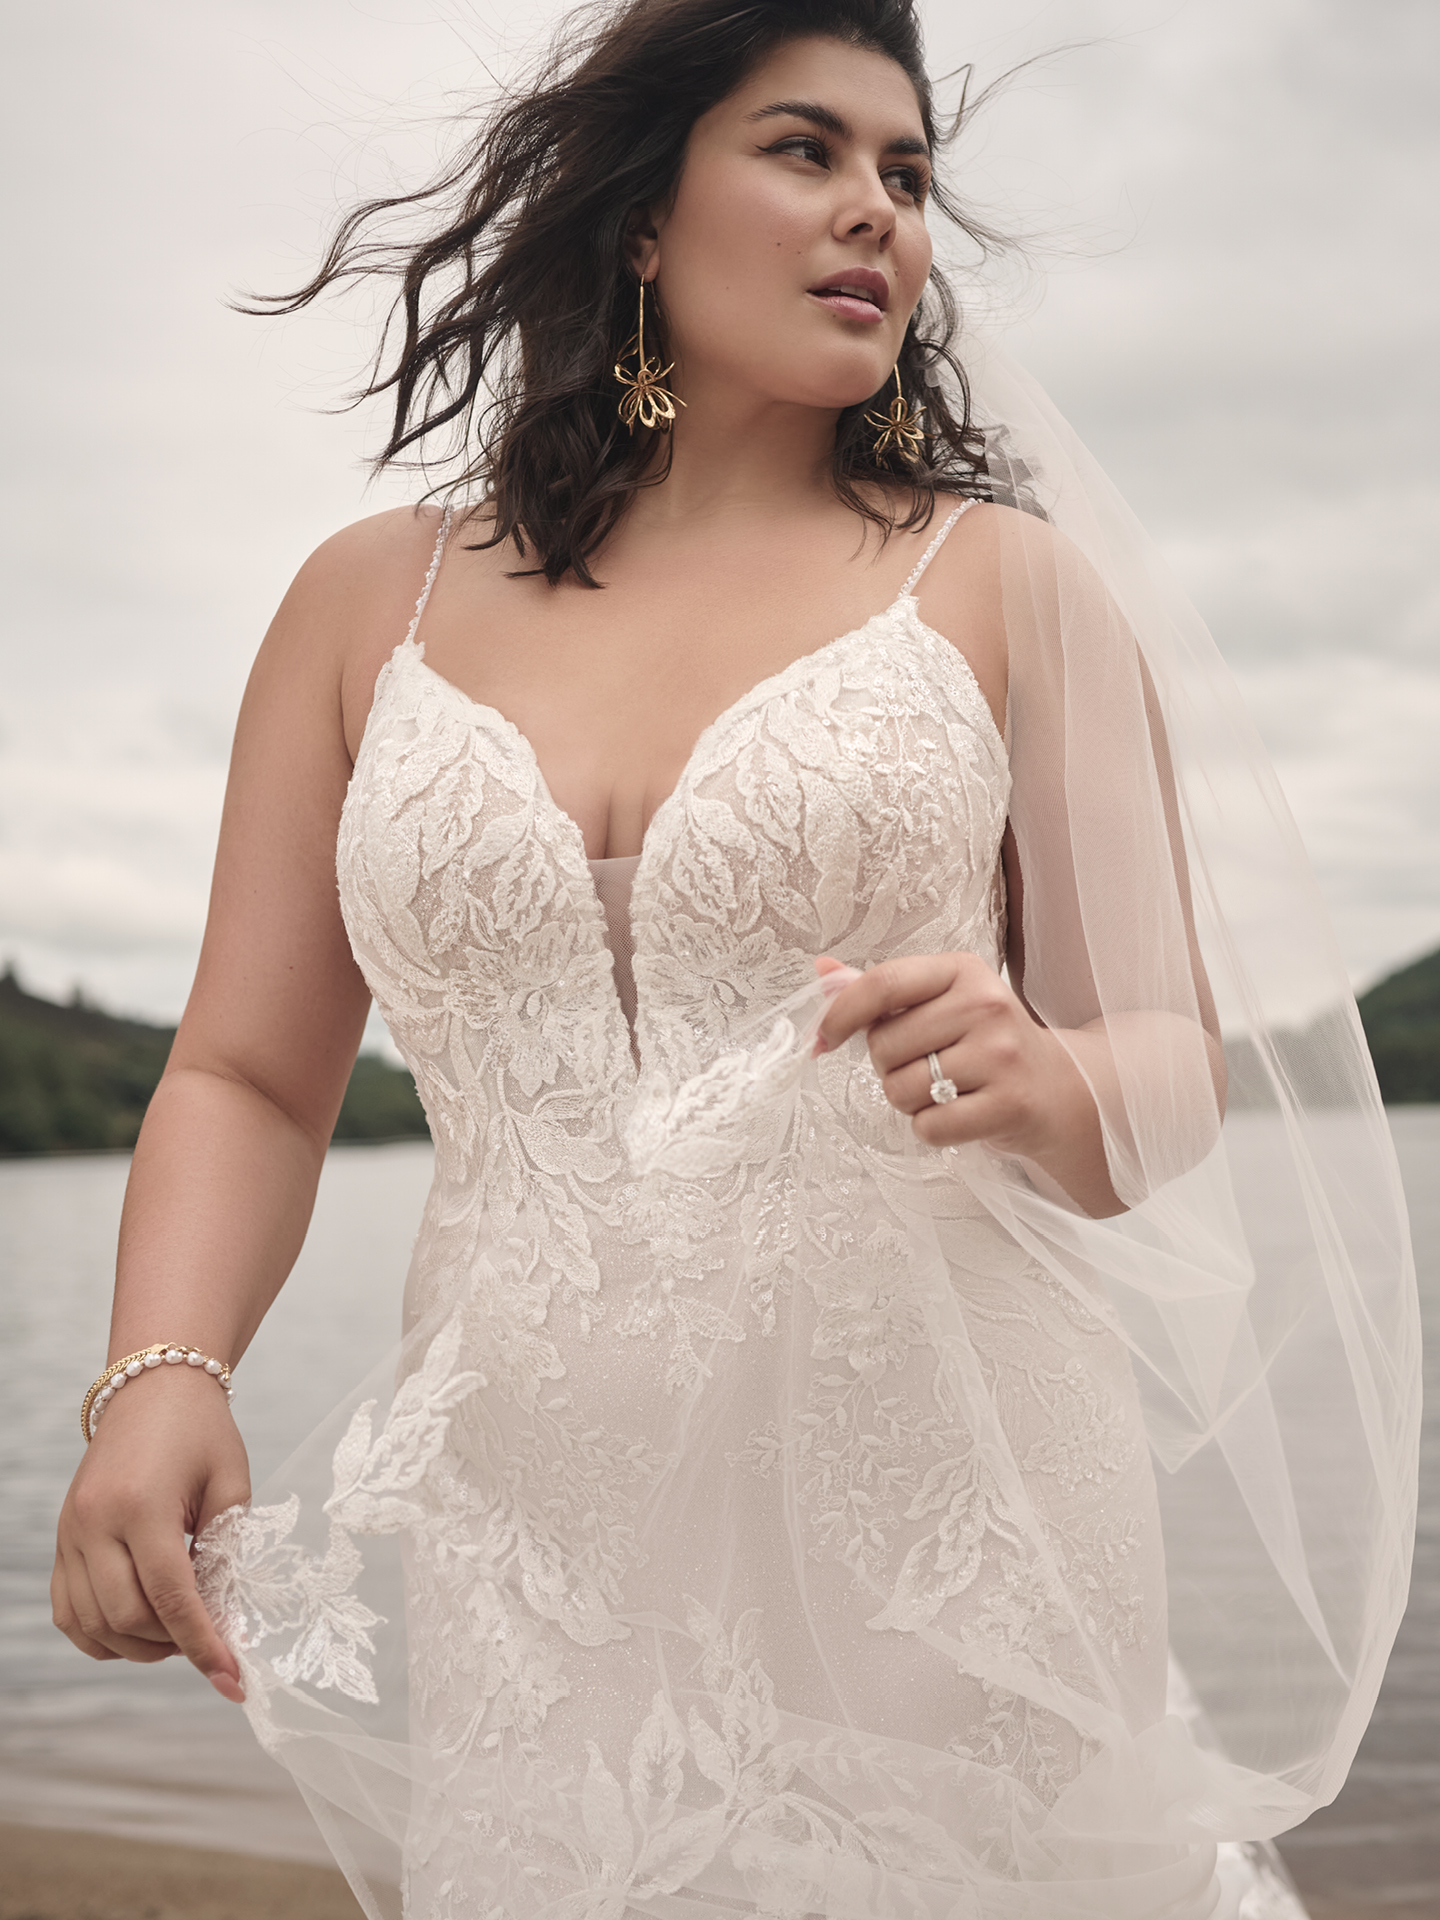 Plus Size Bride In Mermaid Wedding Dress Called Dove By Sottero And Midgley